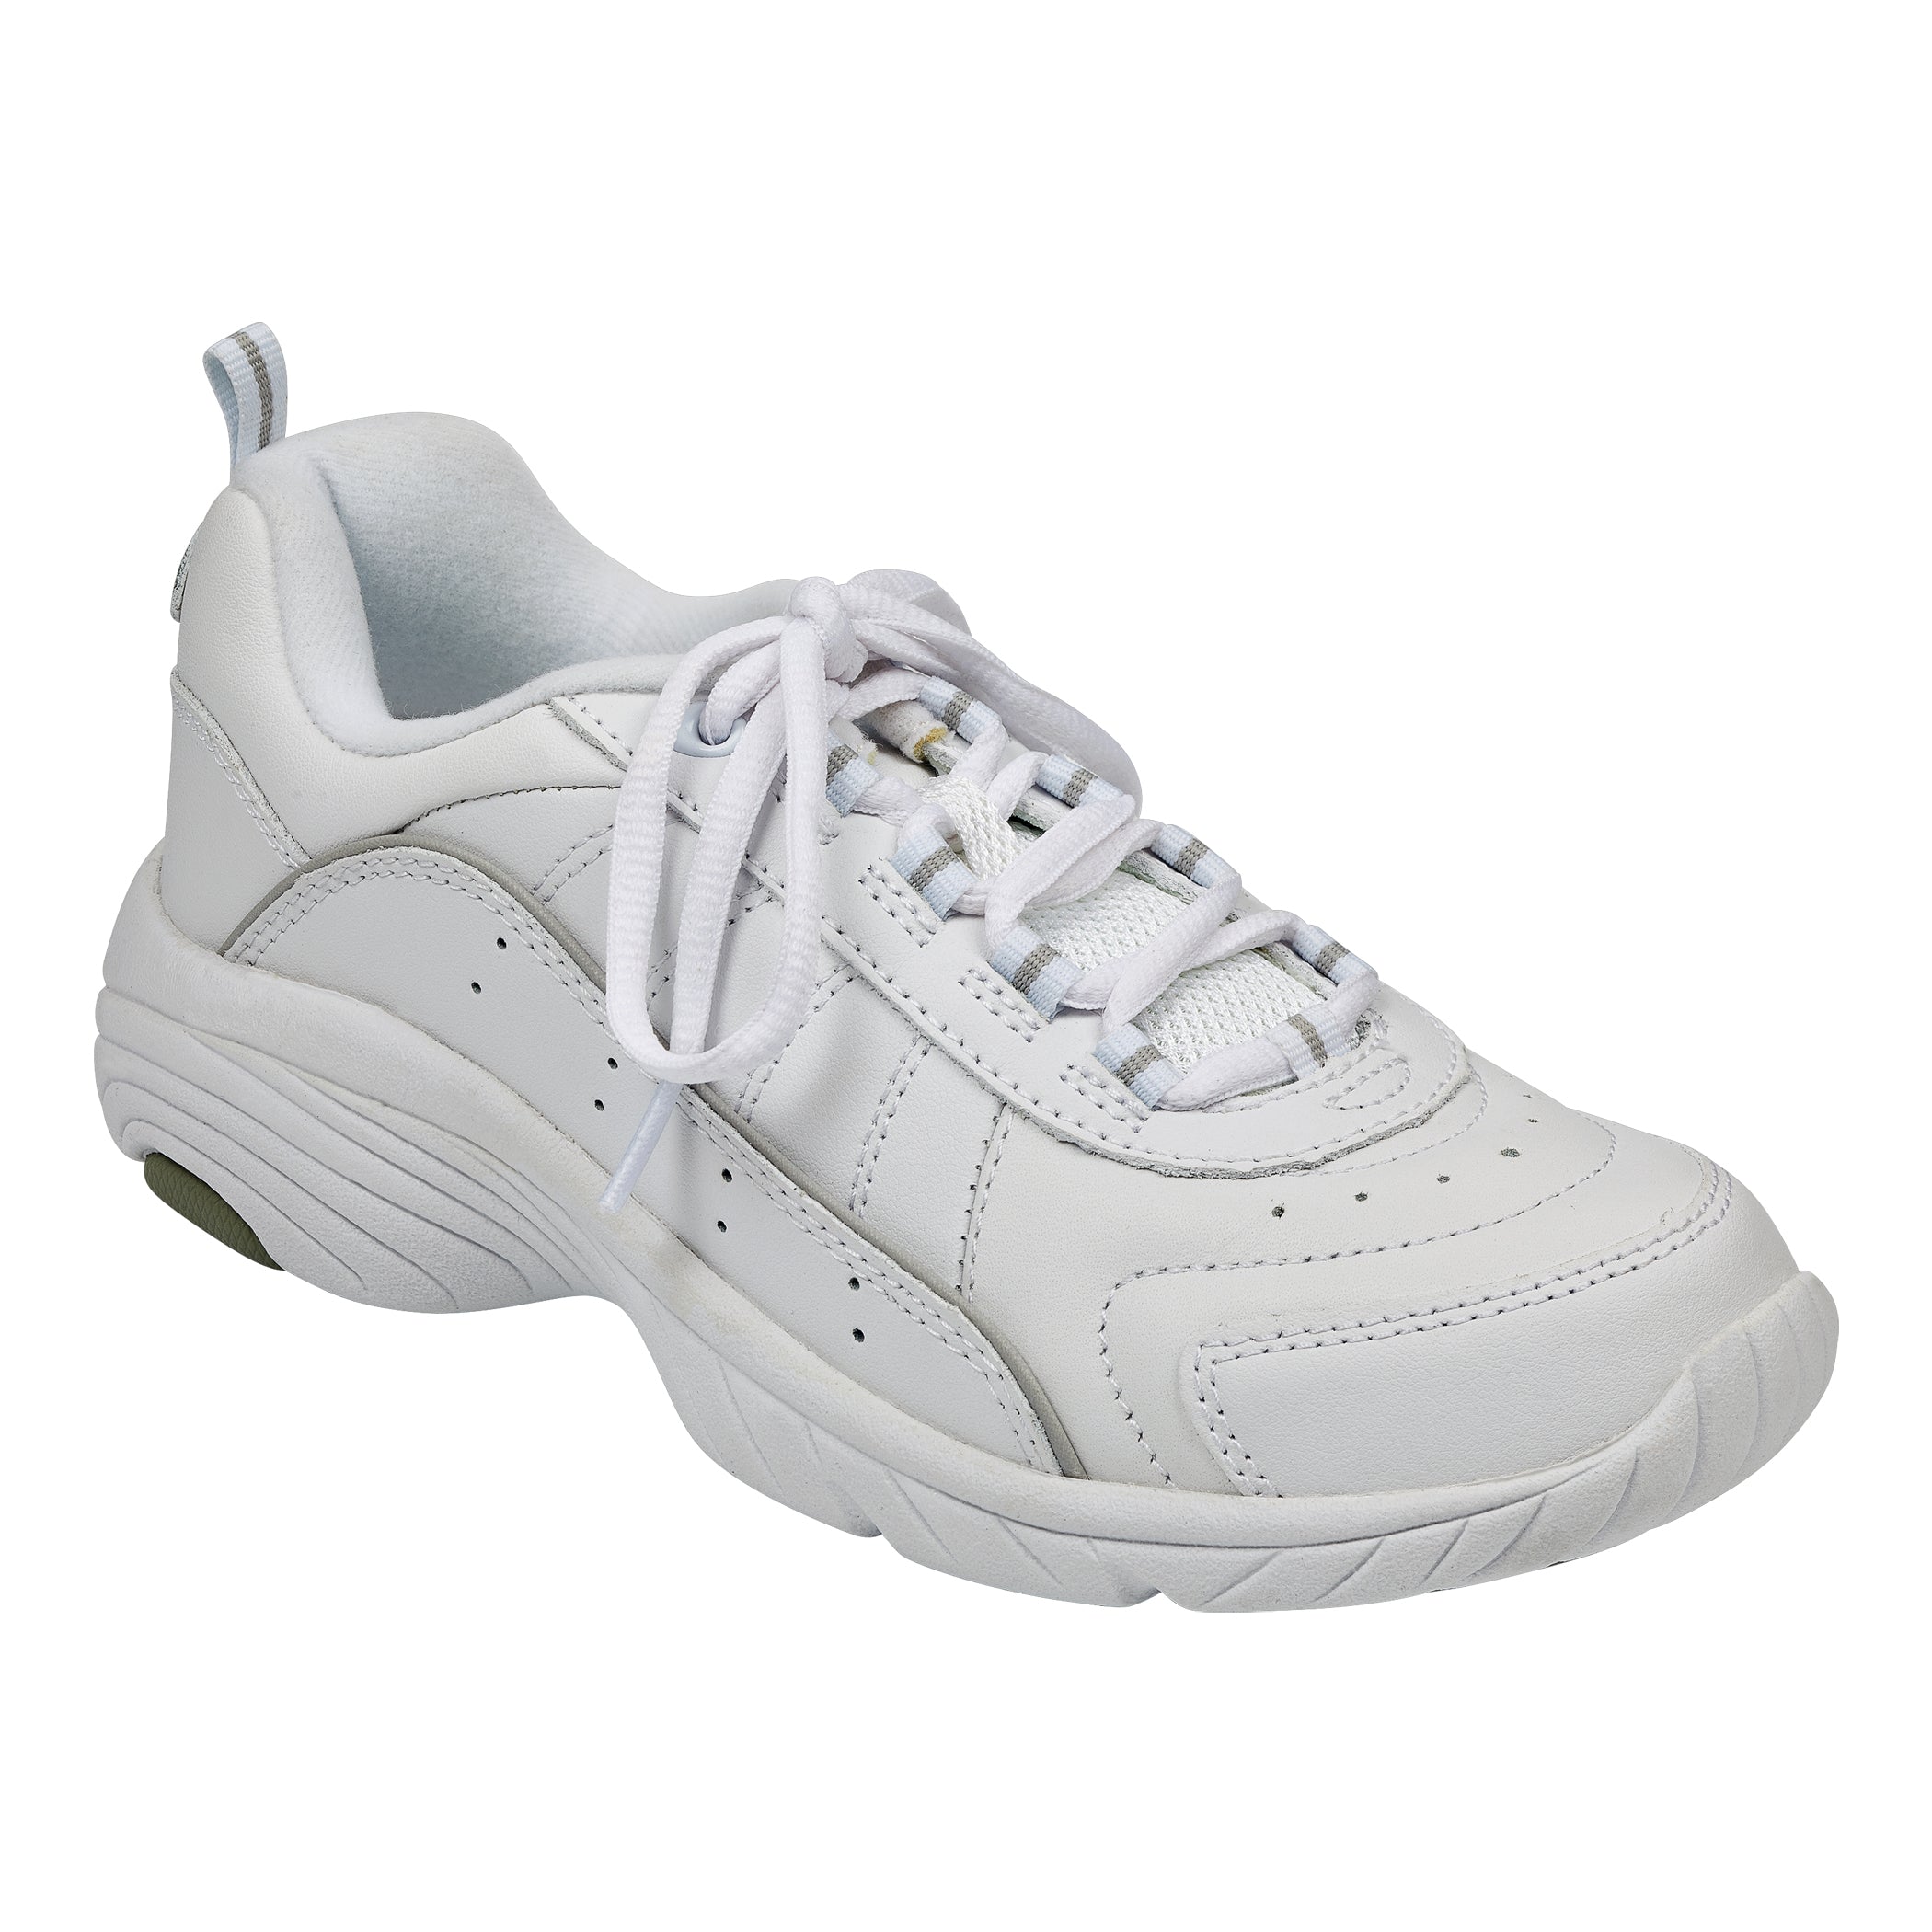 UPC 740362041326 product image for Easy Spirit Punter Athletic Shoes - Leather - White (Size 7), Narrow Width | upcitemdb.com